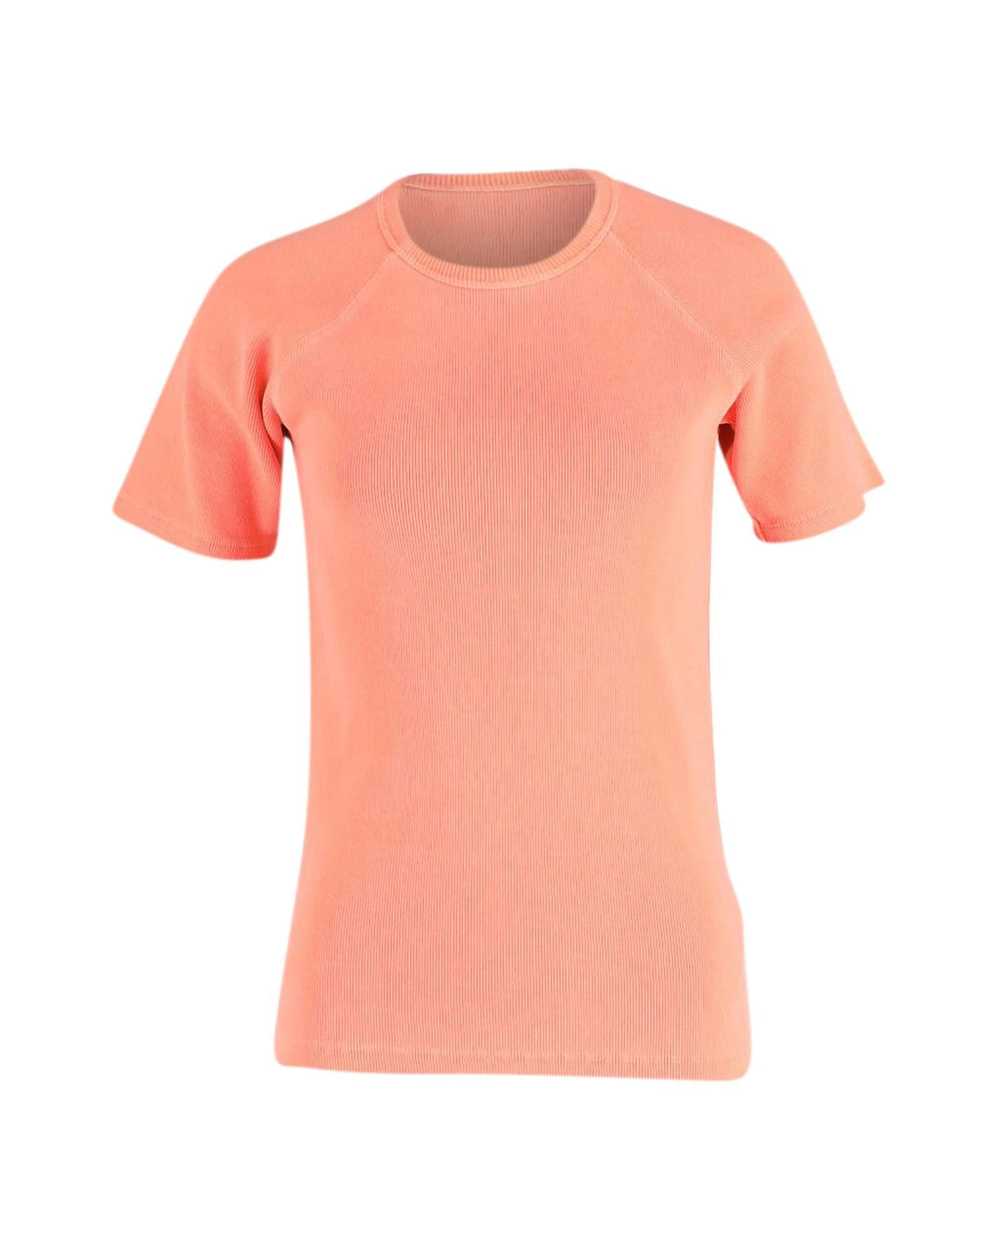 Victoria Beckham Ribbed Knit T-shirt in Coral Ora… - image 1